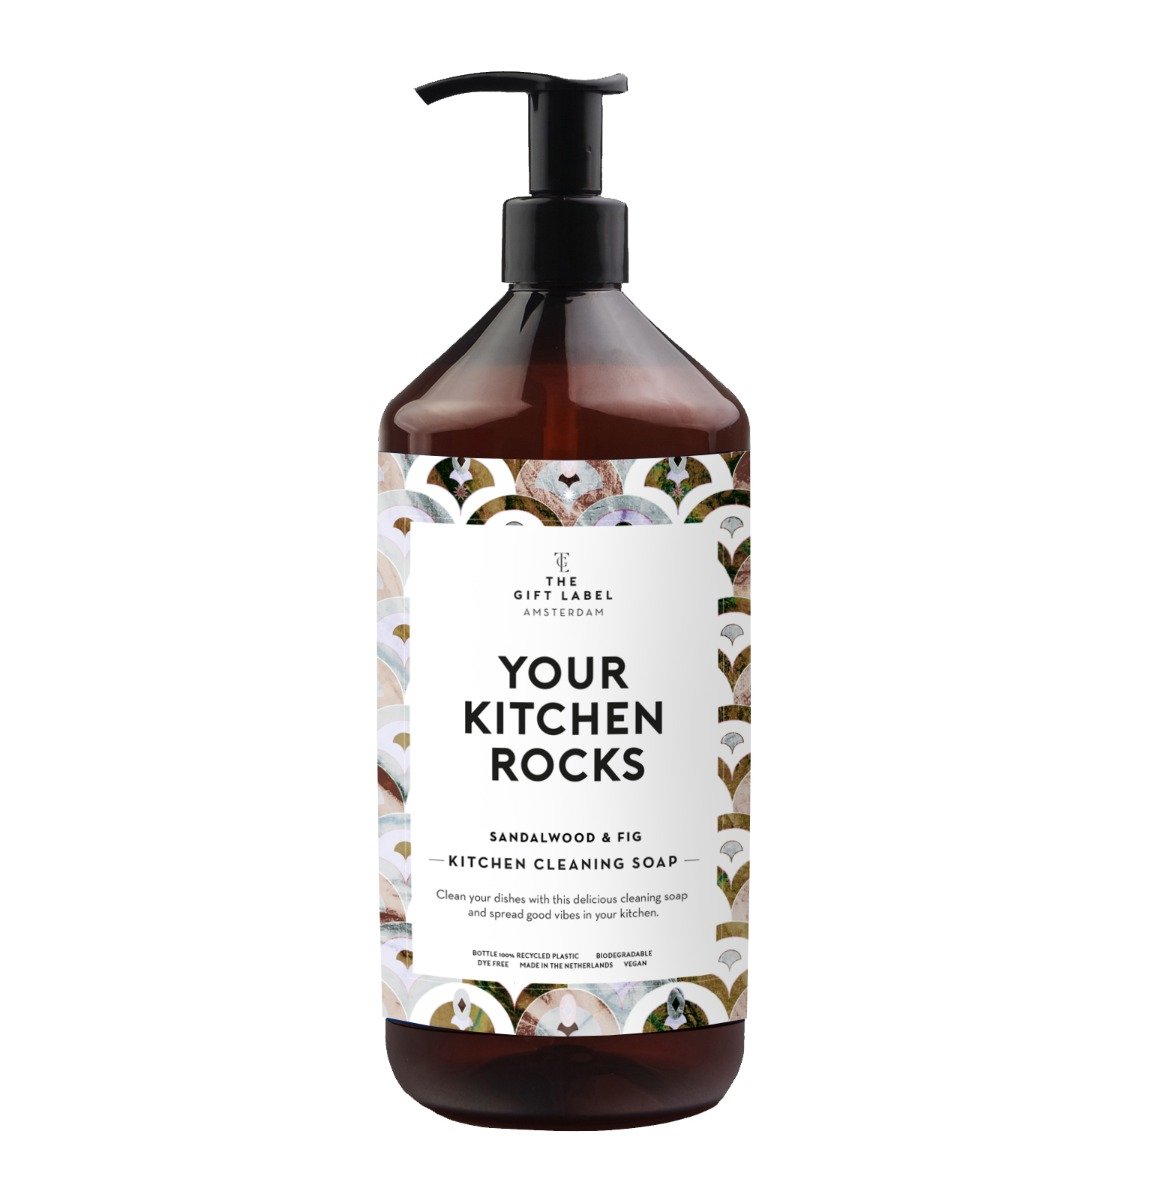 The Gift label kitchen cleaning soap - Your kitchen rocks